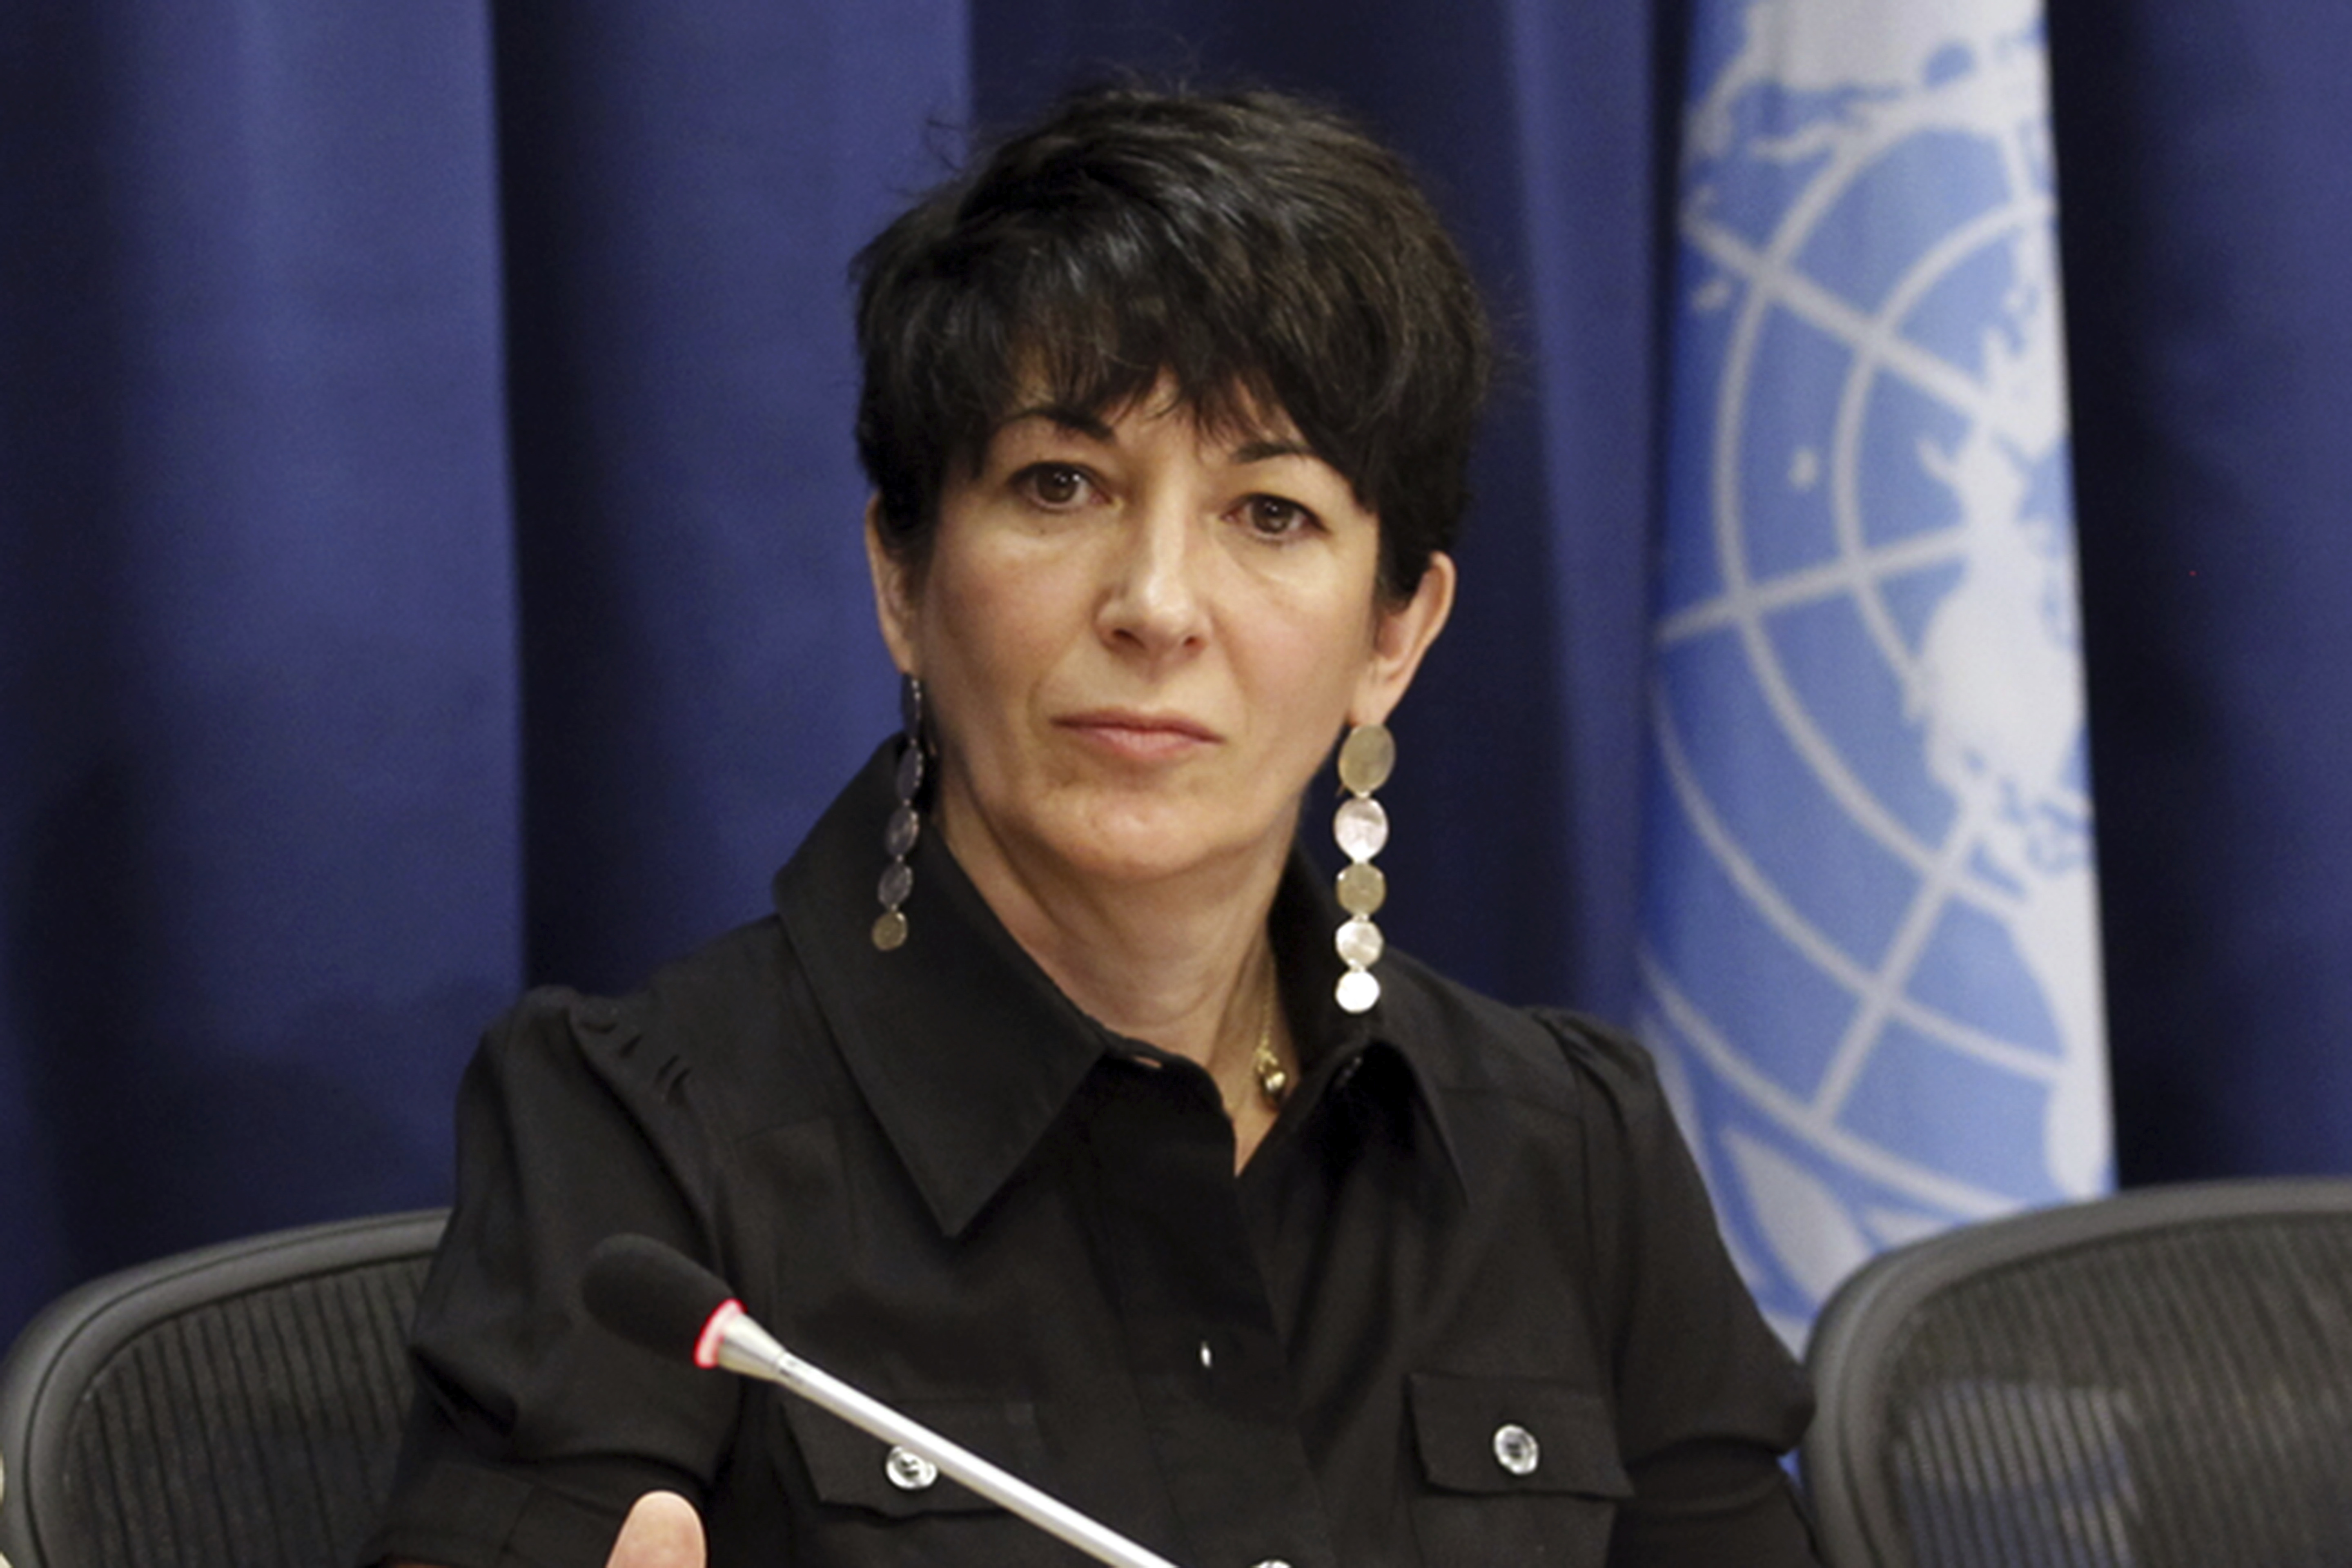 Ghislaine Maxwell still insists she herself was a victim of Epstein and did nothing wrong